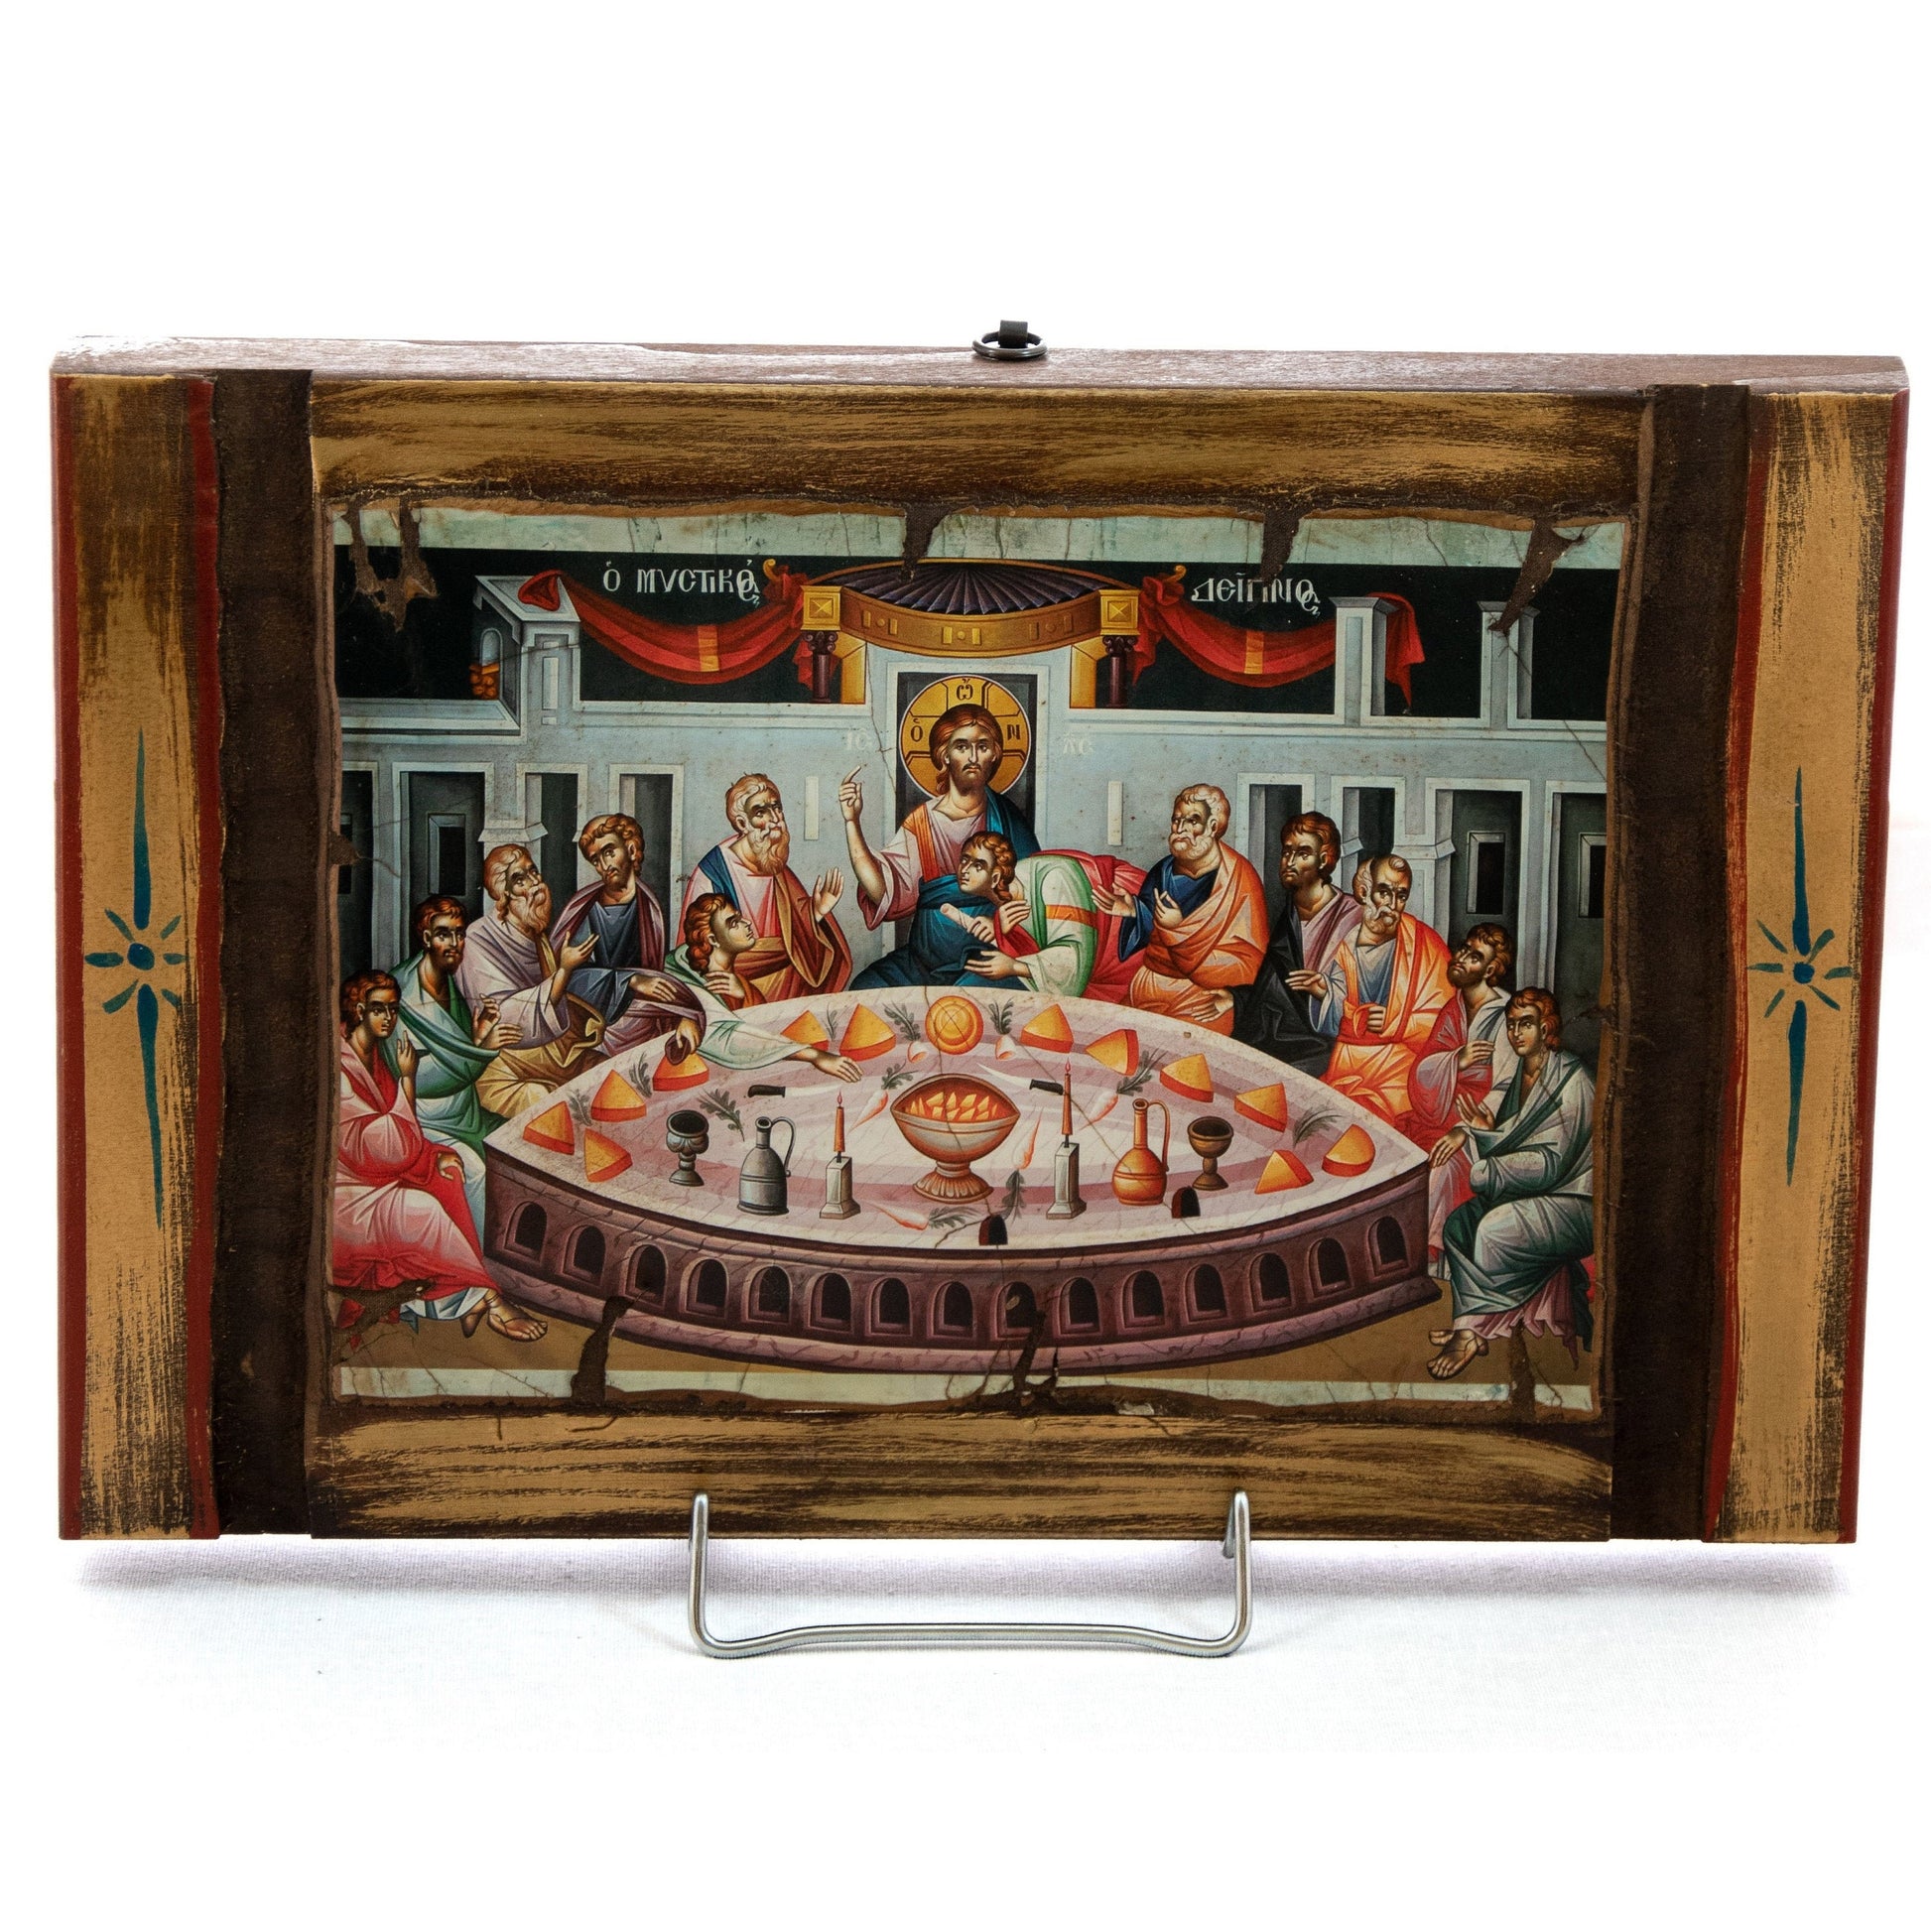 The Last Supper Orthodox icon, Jesus Christ icon, Handmade canvas Byzantine art wall hanging of Holy Communion wood plaque 38x25cm, religious decor TheHolyArt